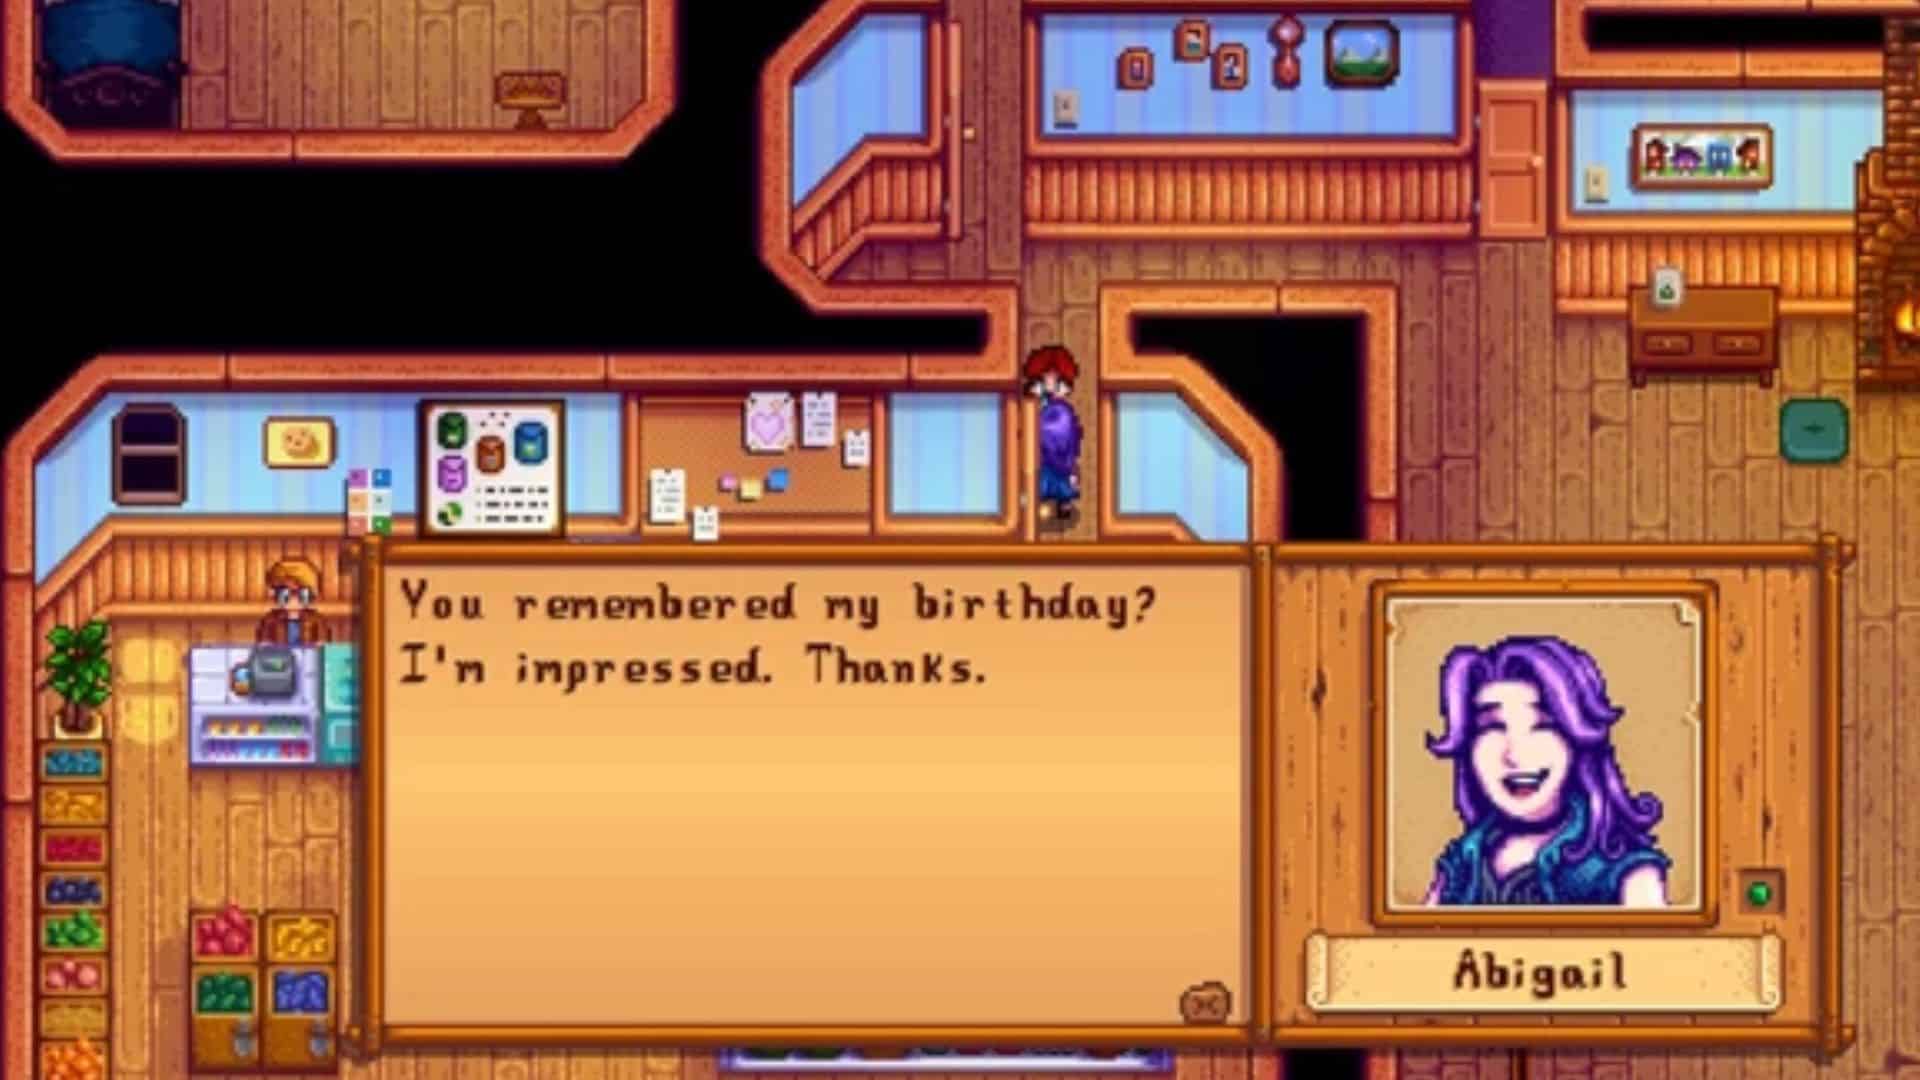 Giving a gift to Abigail on her birthday